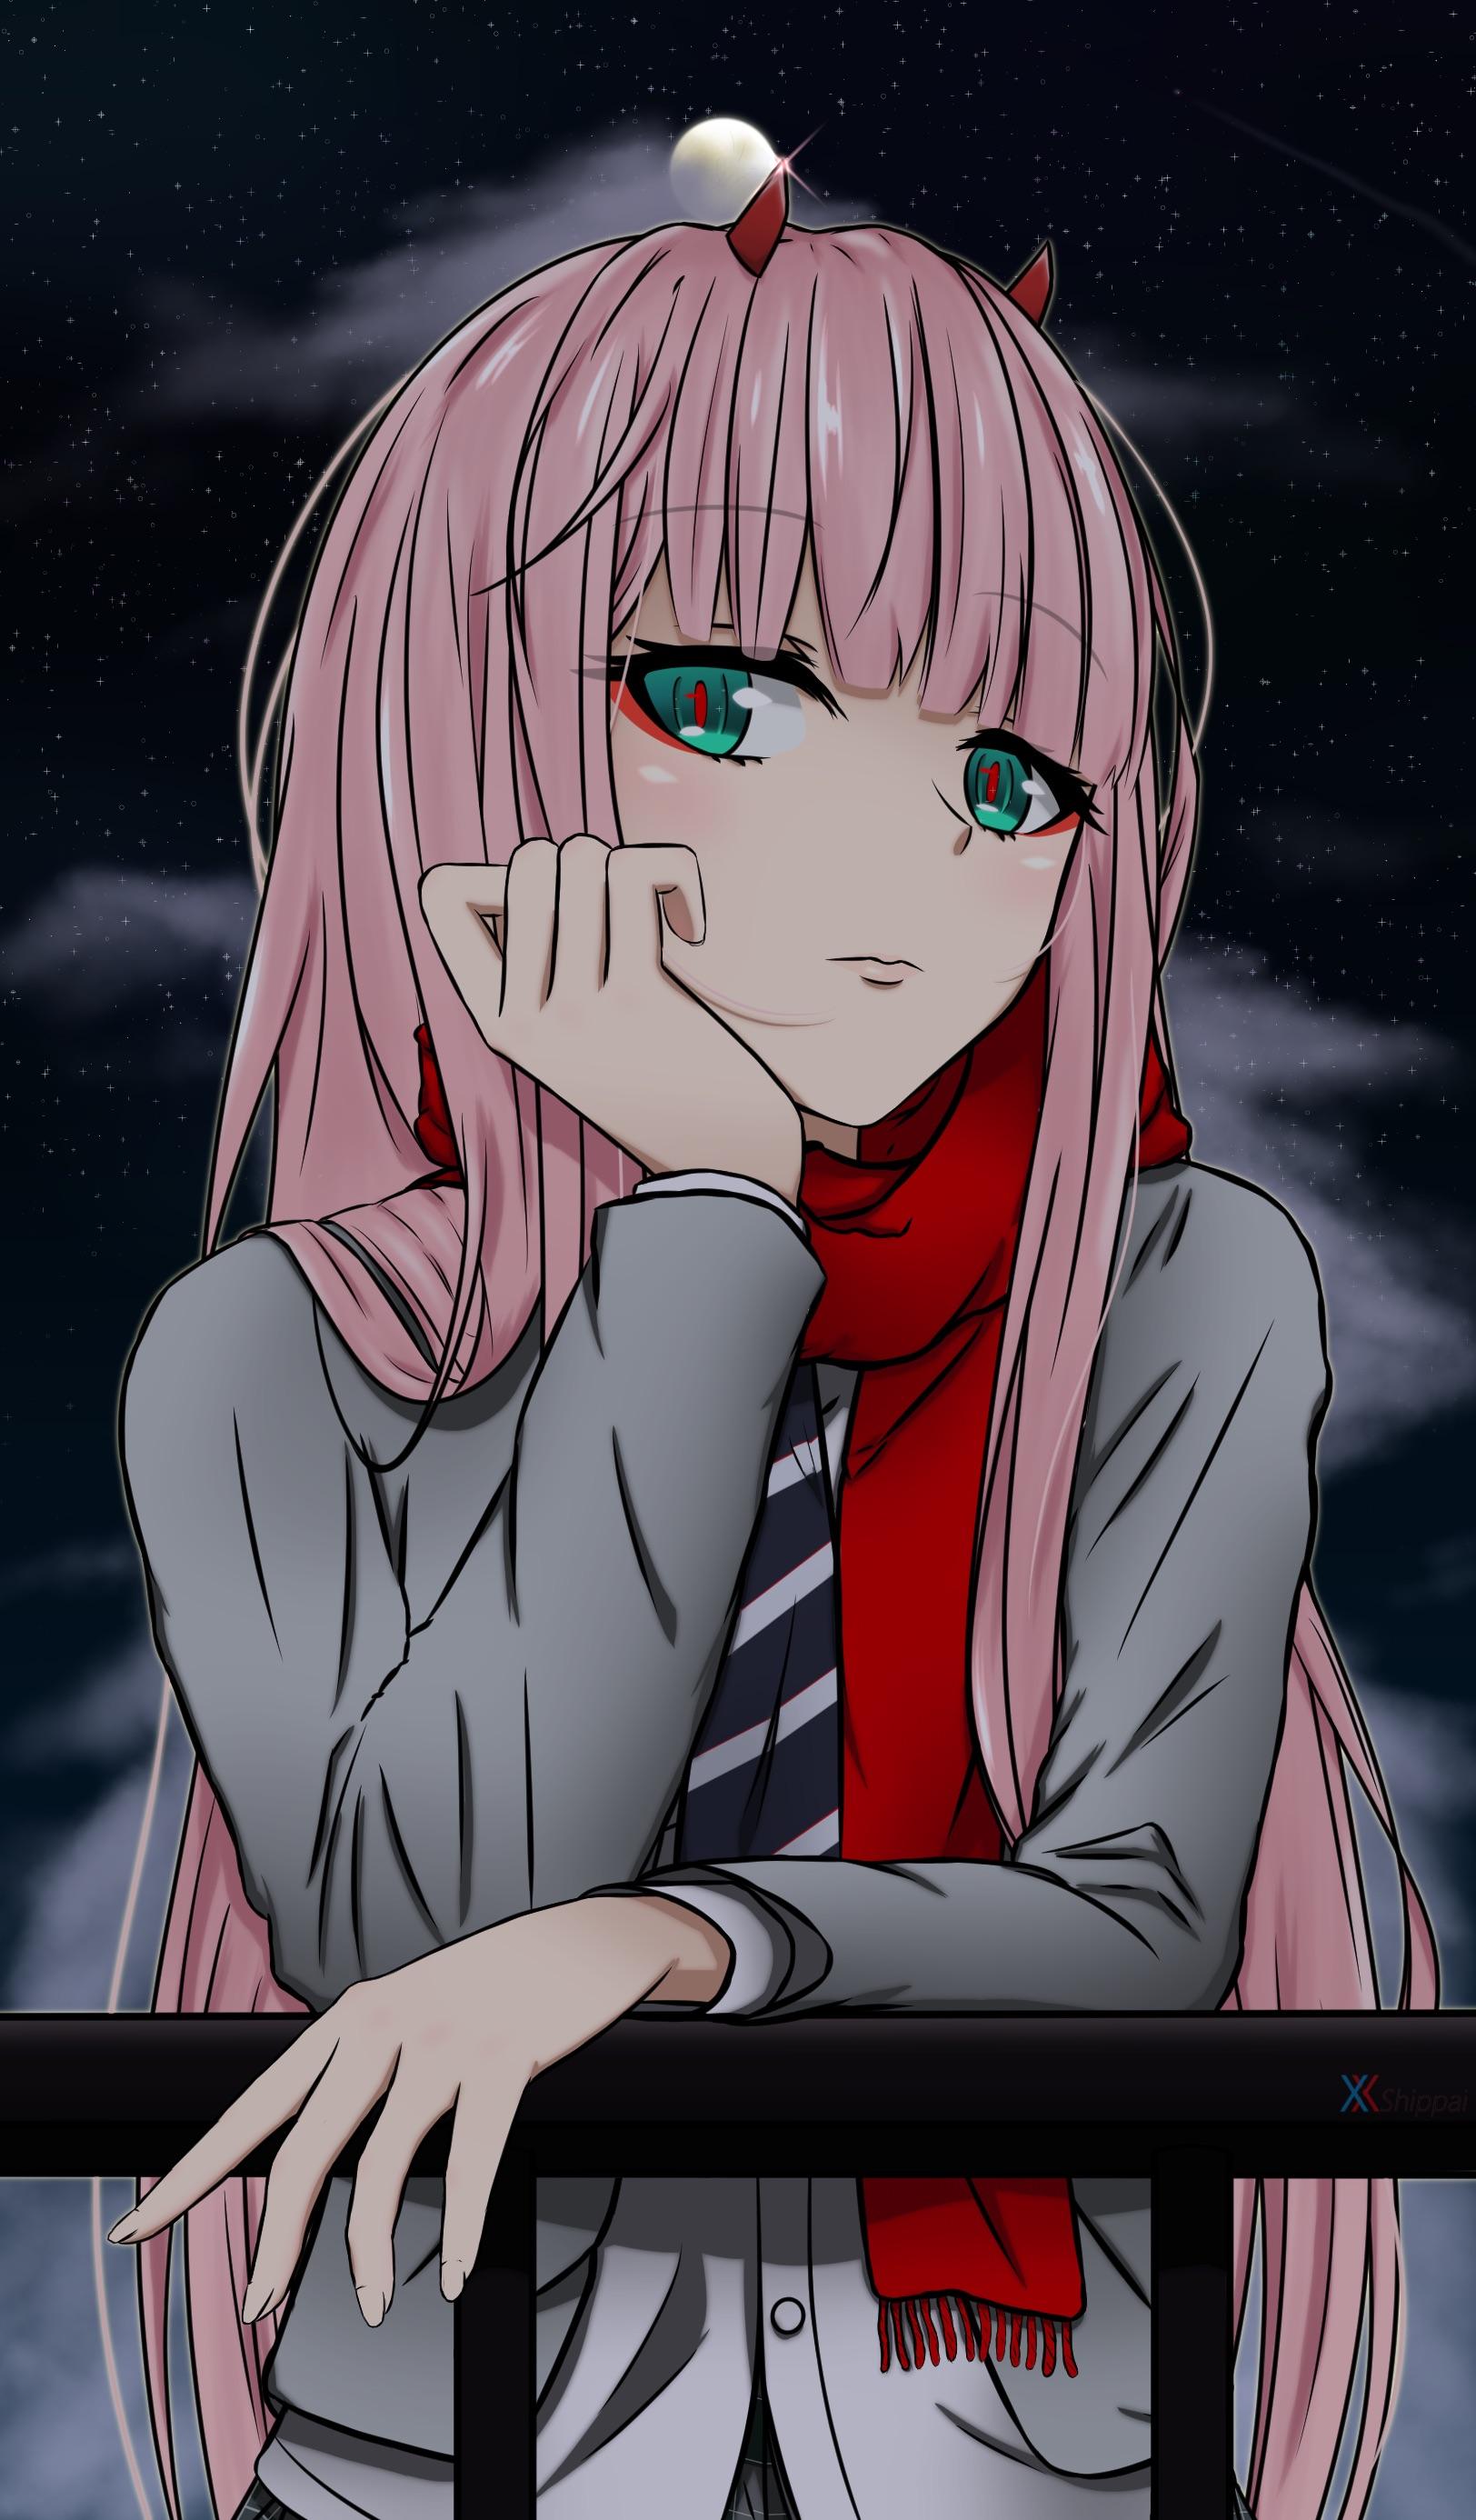 Best R Anime Image On Pholder. [OC] Hi There, I Drew Zero Two, Hope You'll Like It!